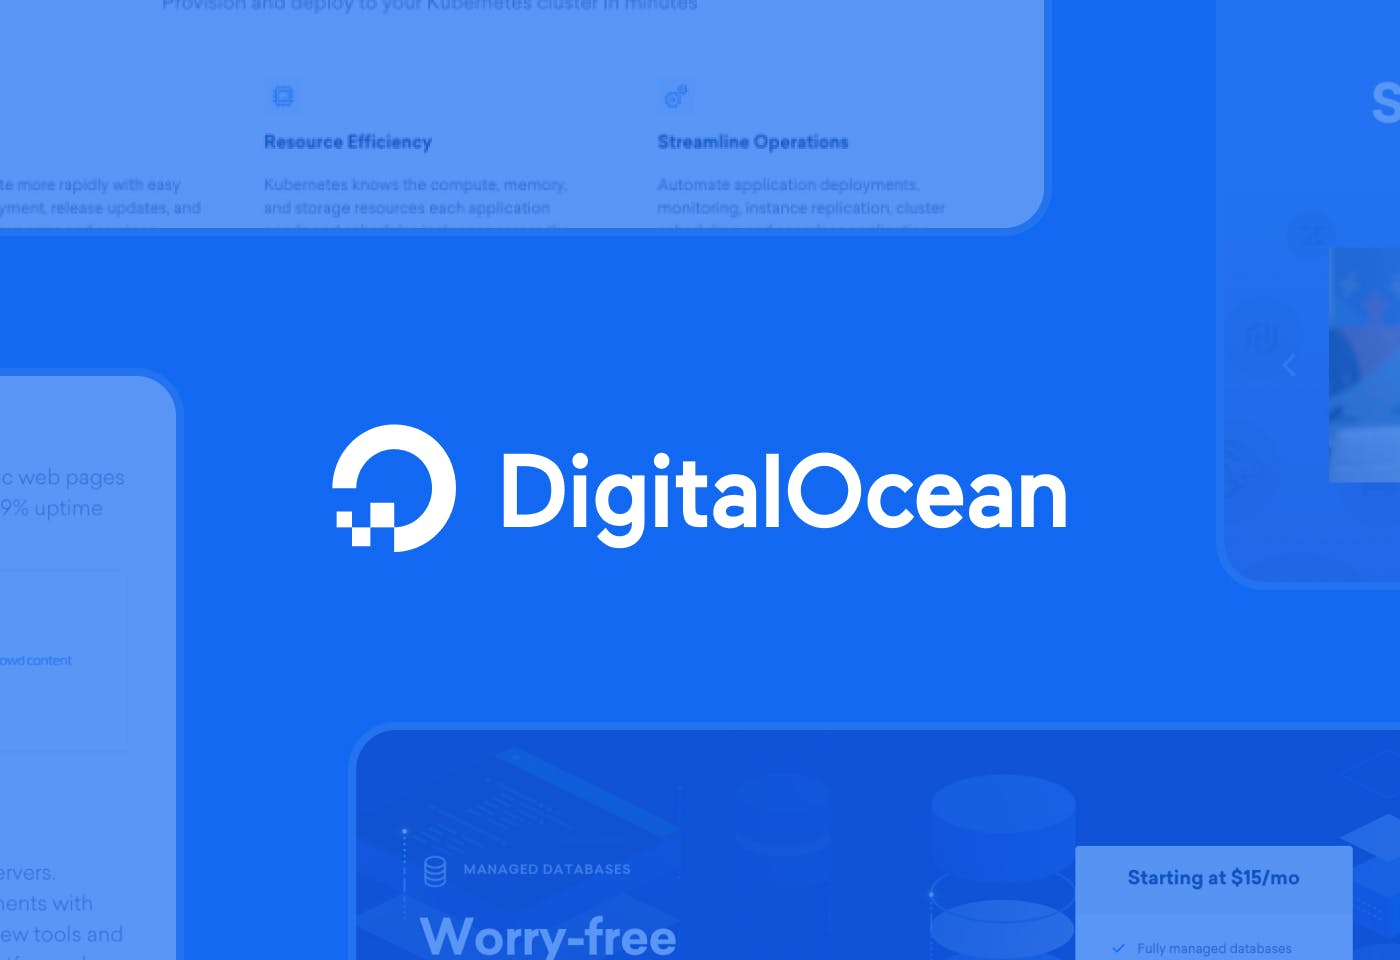 The Digital Ocean logo in the center of a blue background with faded out screenshots of the Digital Ocean product along the edges of the image